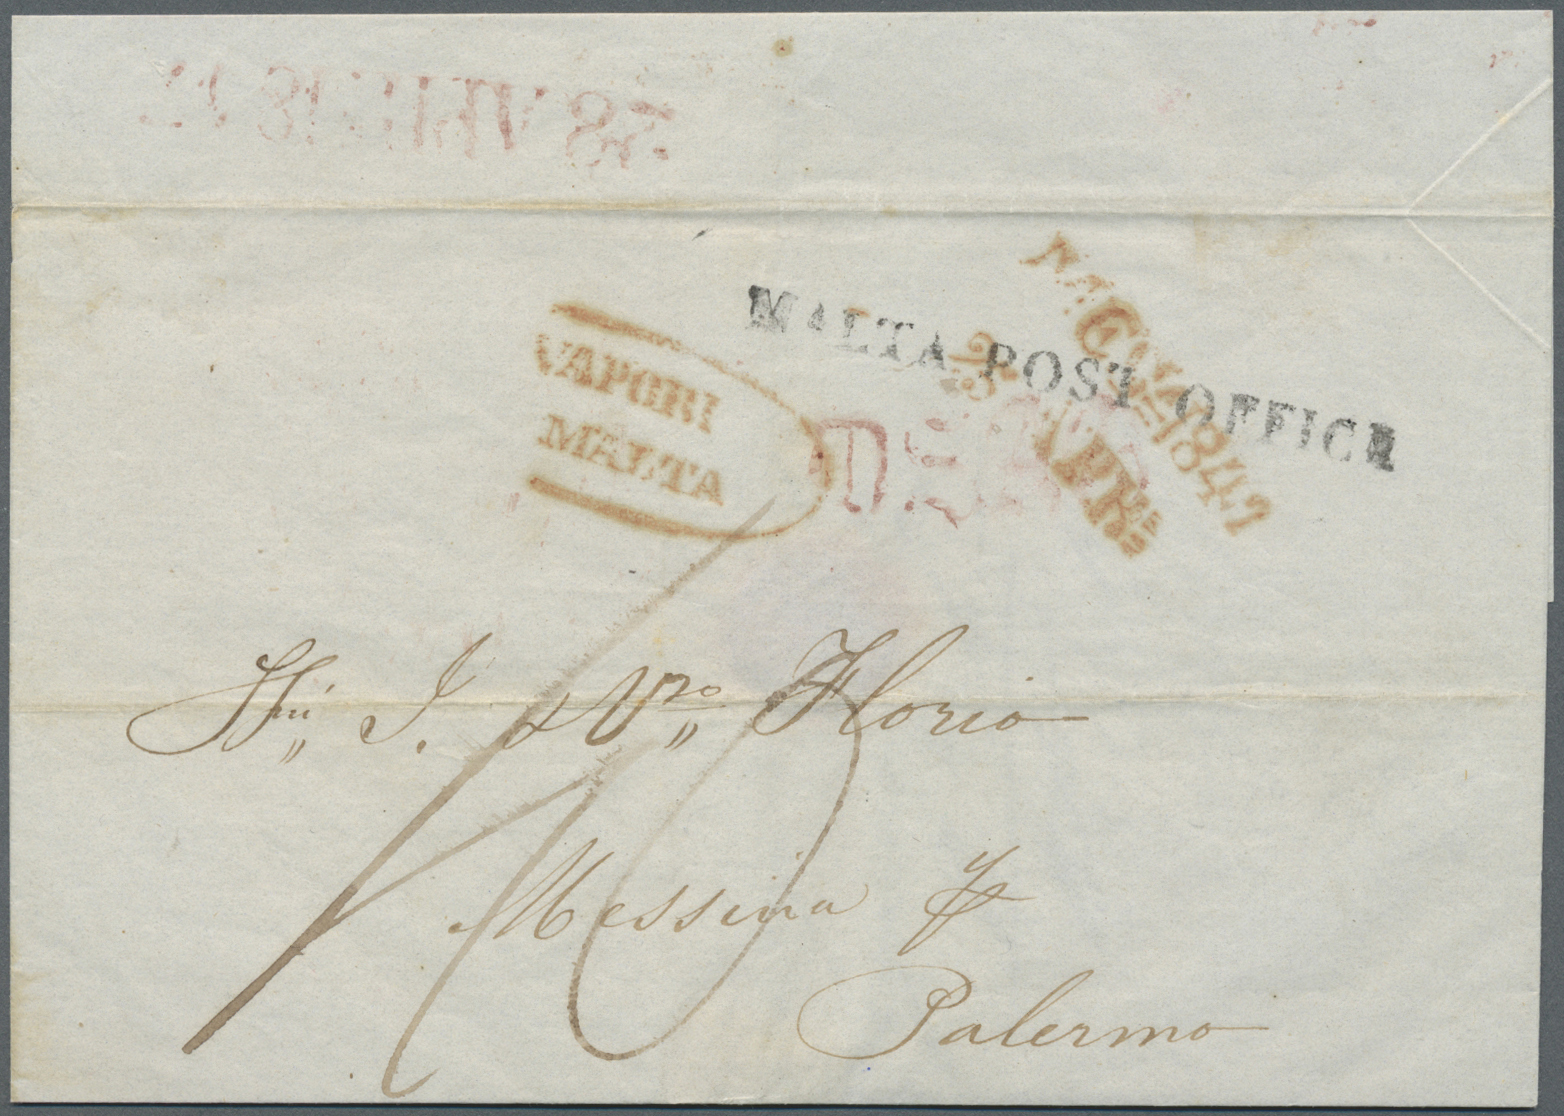 Br Malta - Vorphilatelie: 1847, "MALTA POST OFFICE" One Line Stamp (type M.P.O.-2a) On Folded Letter From PALERMO - Malte